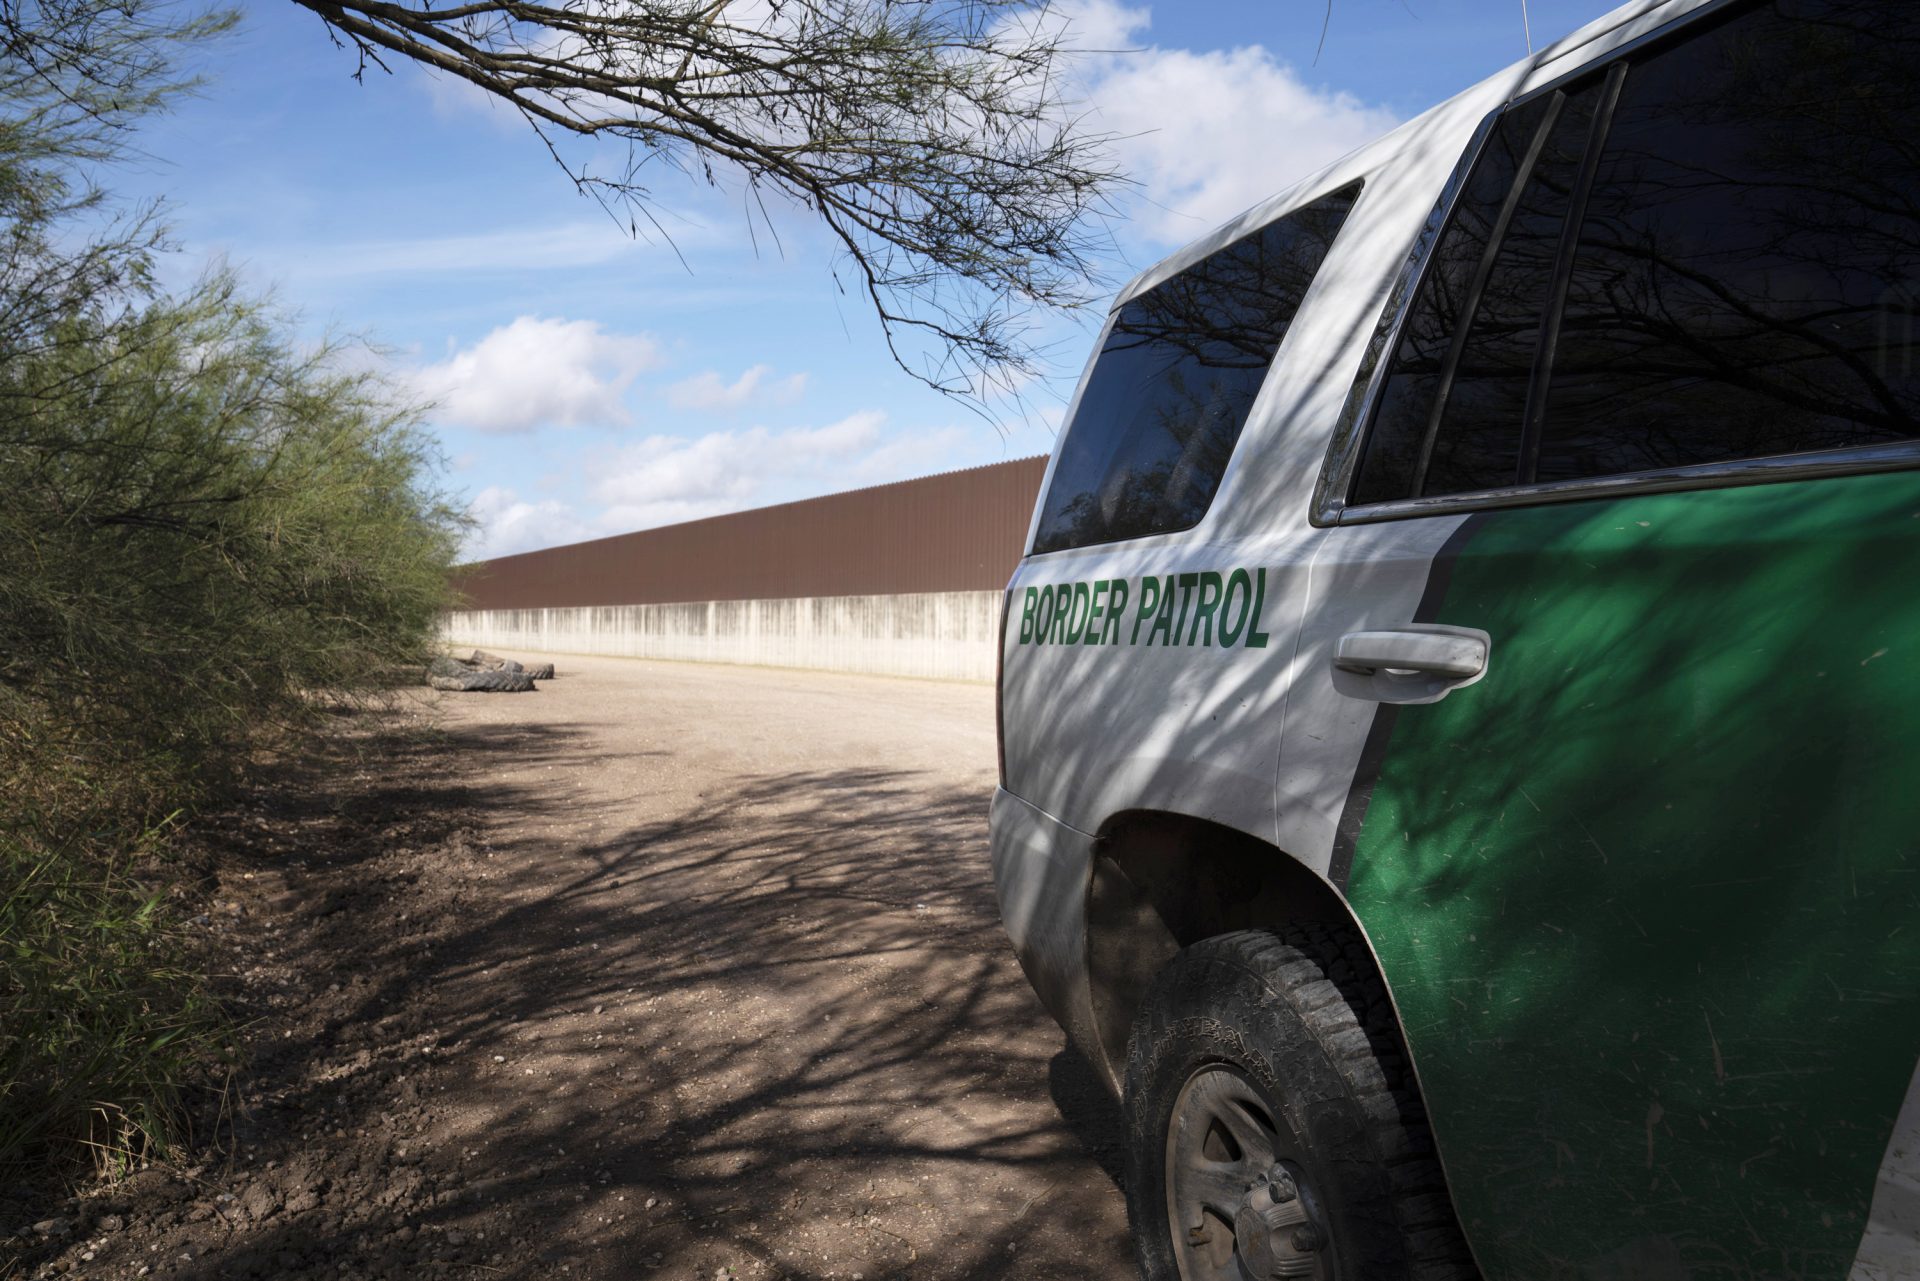 A Border Patrol vehicle is parked near the existing border wall south of Donna, Texas.